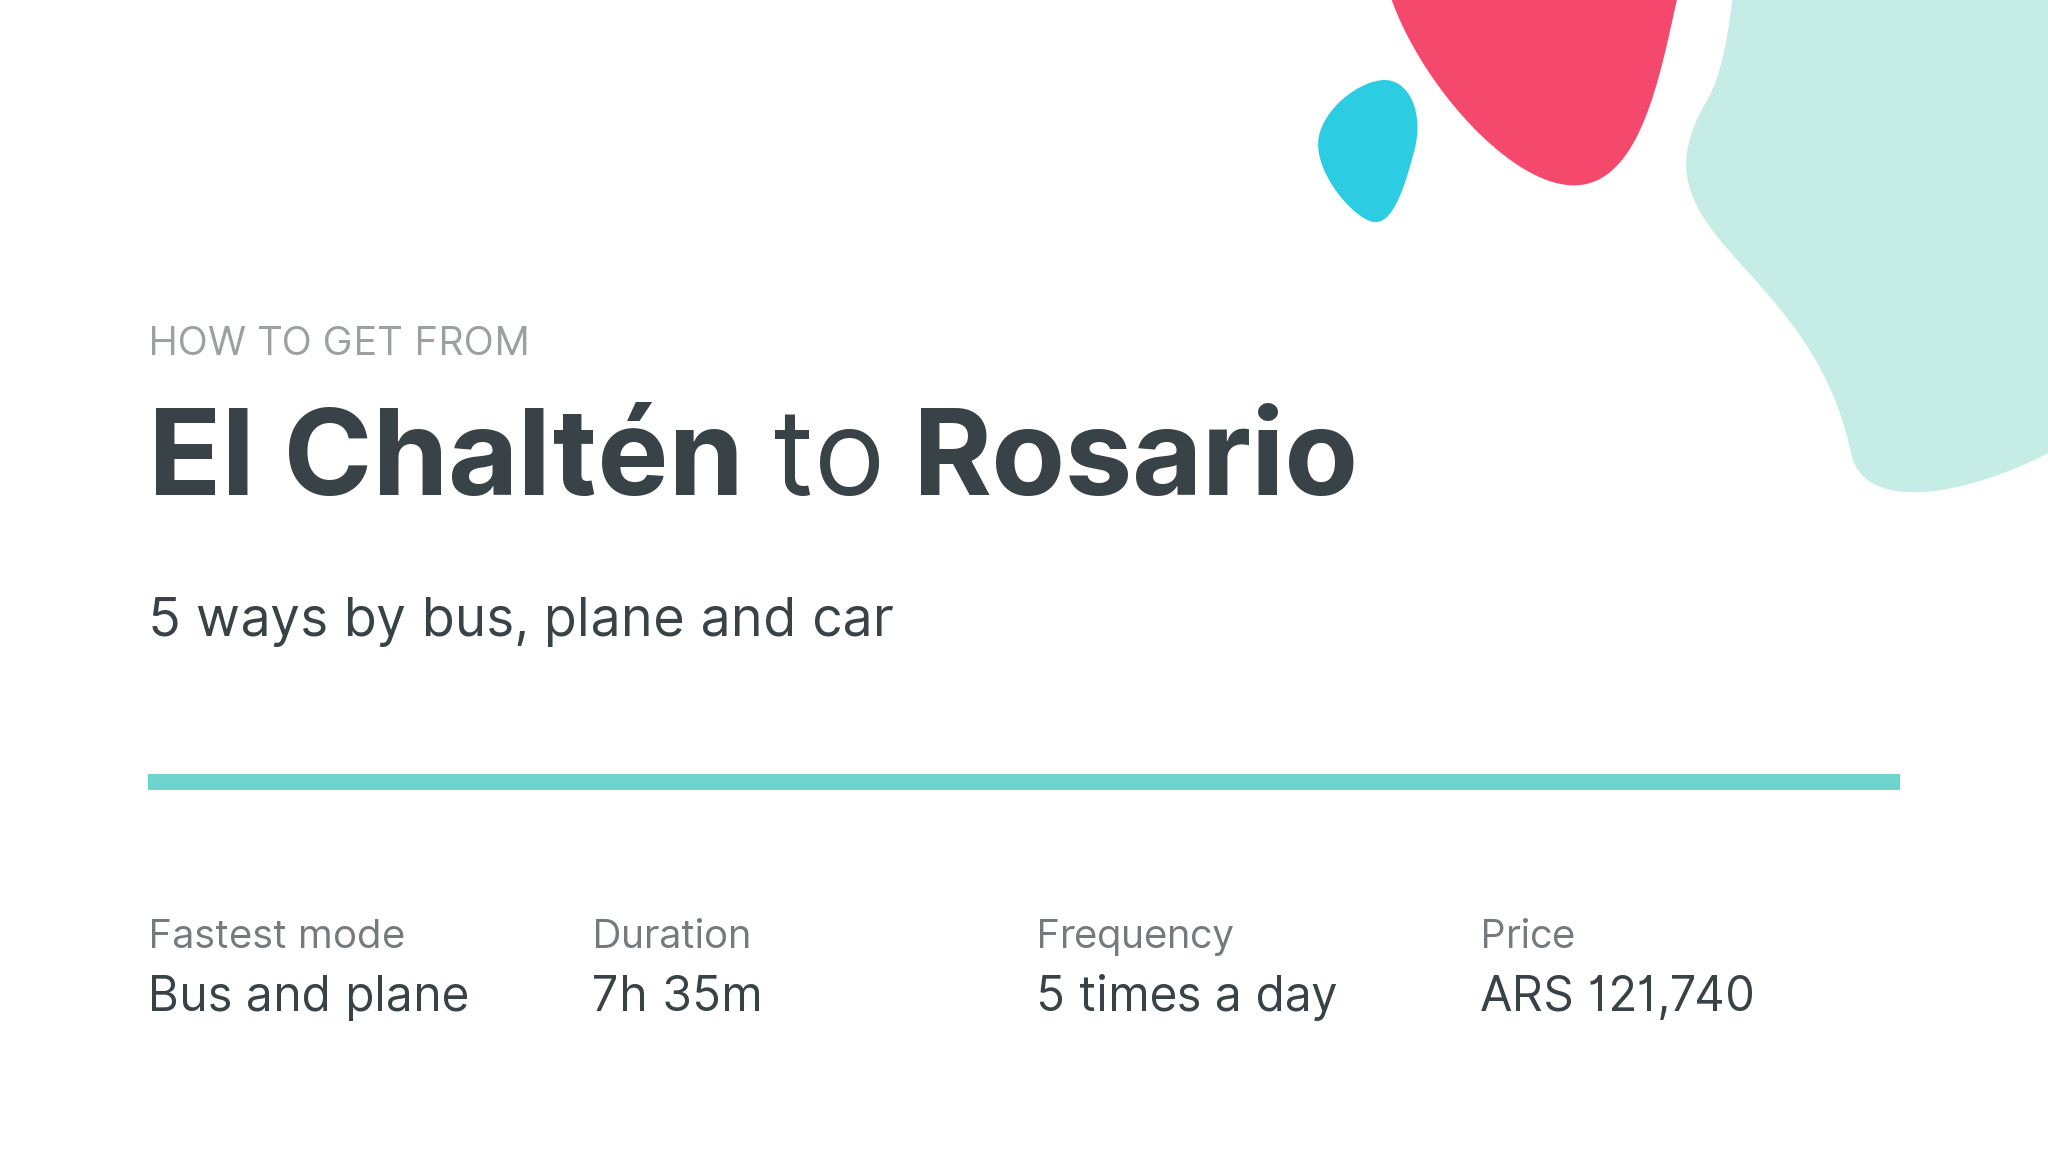 How do I get from El Chaltén to Rosario